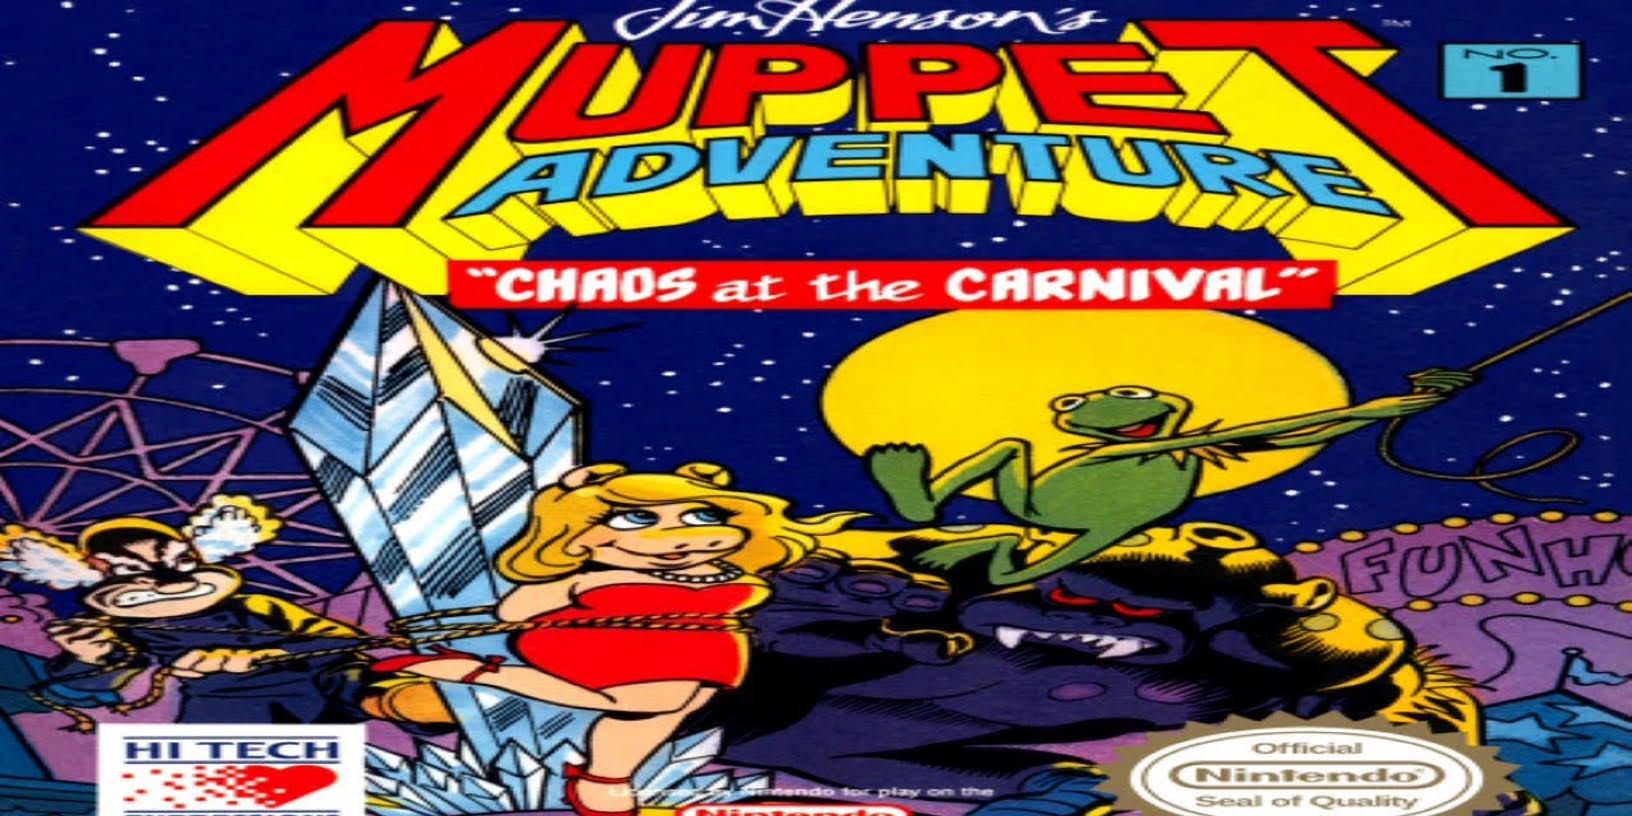 Muppet Adventure: Chaos at the Carnival cover art